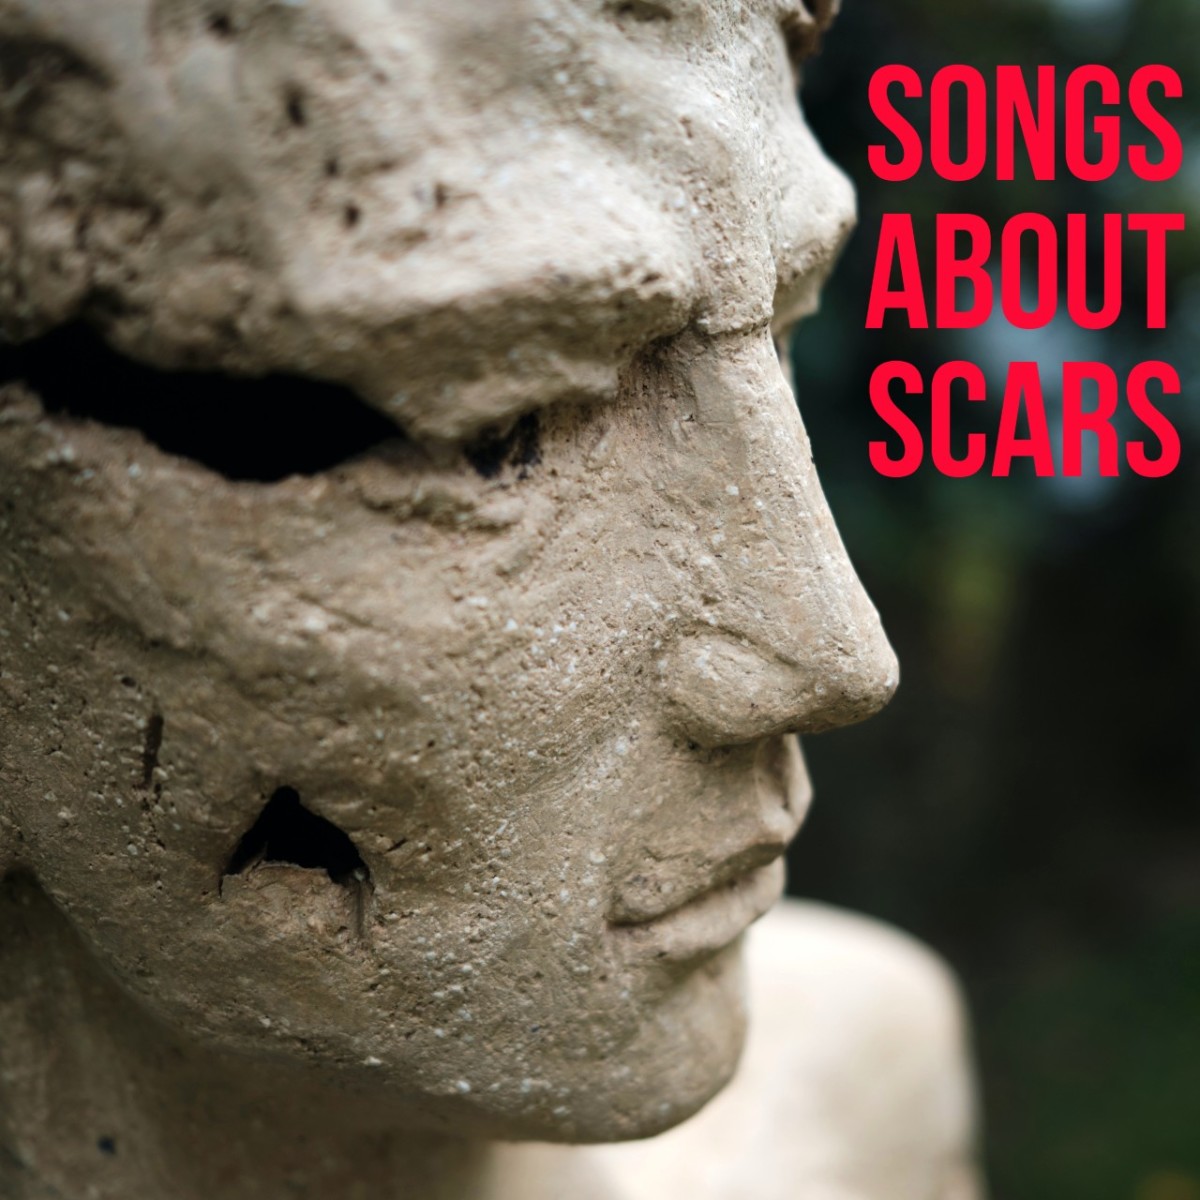 Celebrate the power of healing and triumphing over pain and adversity with pop, rock, country, and R&B songs about scars and wounds.